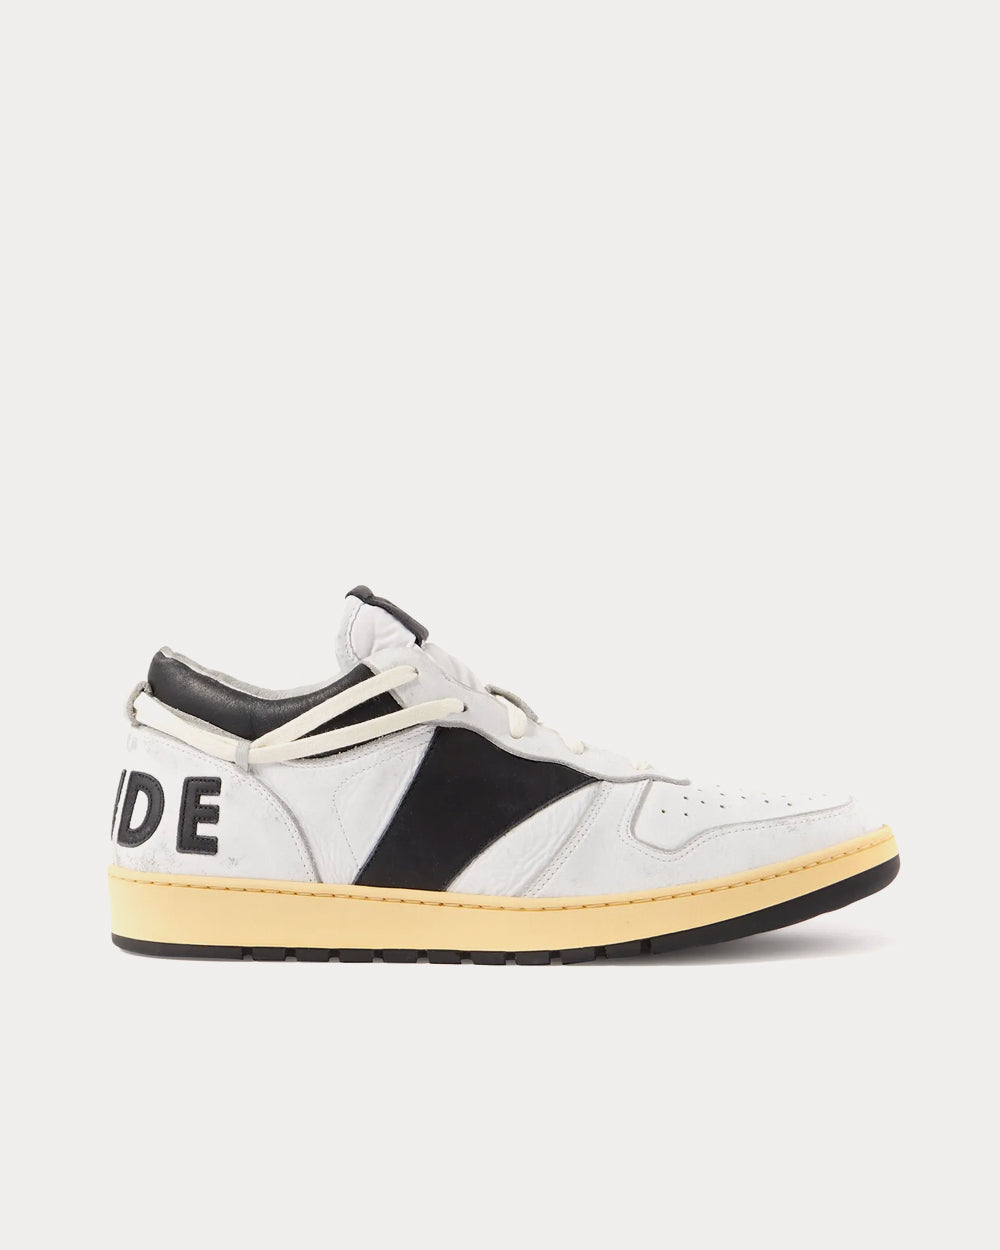 Rhude - Rhecess Distressed Leather White / Black Low Top Sneakers